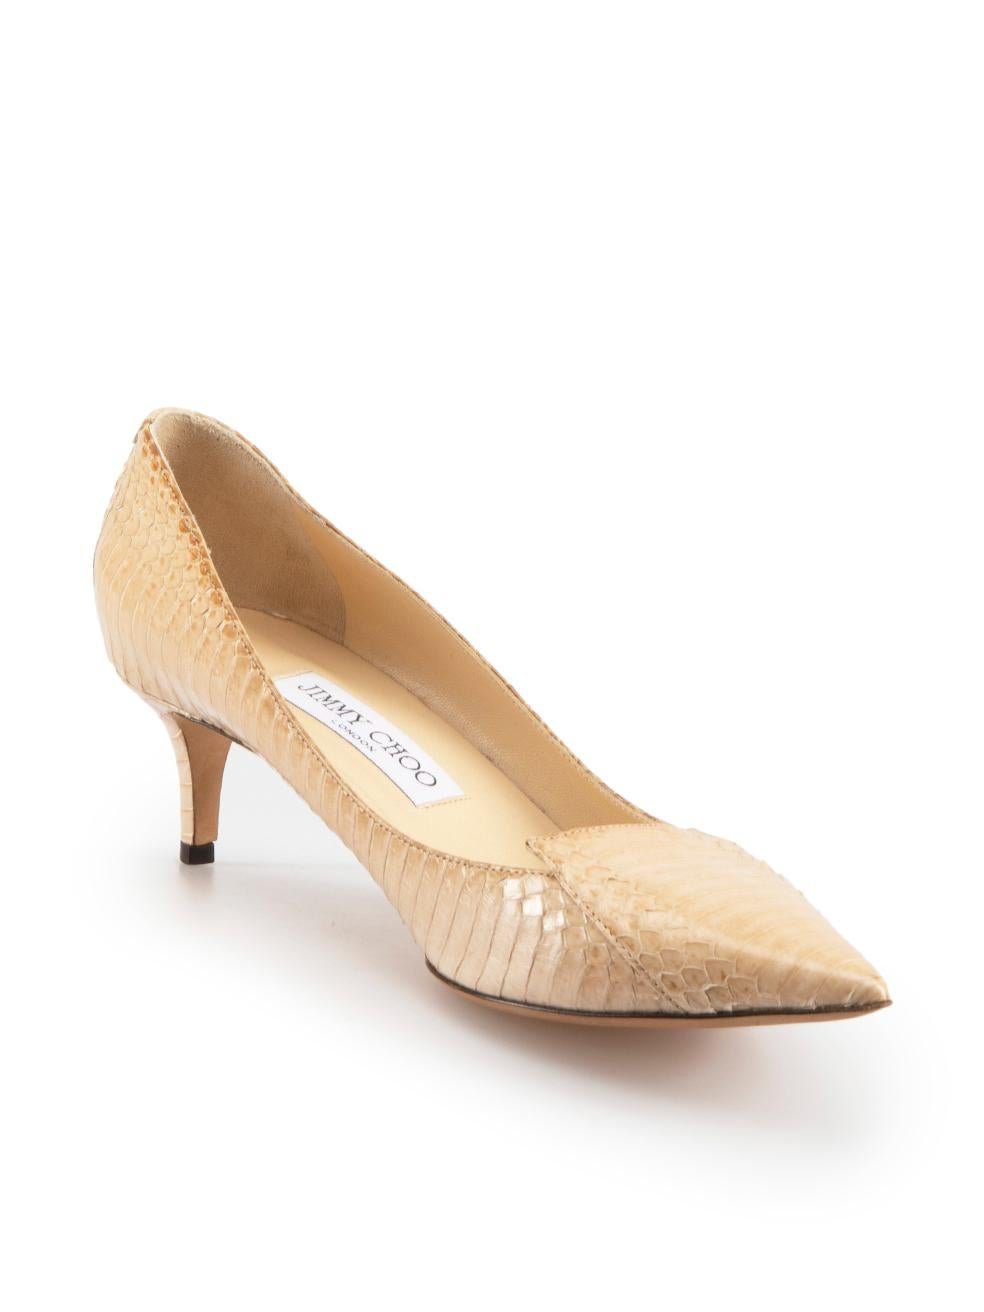 CONDITION is Very good. Minimal wear to heels is evident. Minimal wear to uppers with light peeling of snakeskin due to the nature of the material, small discoloured mark found on right outer quarter. Very mild scuffing on the outsole of this used